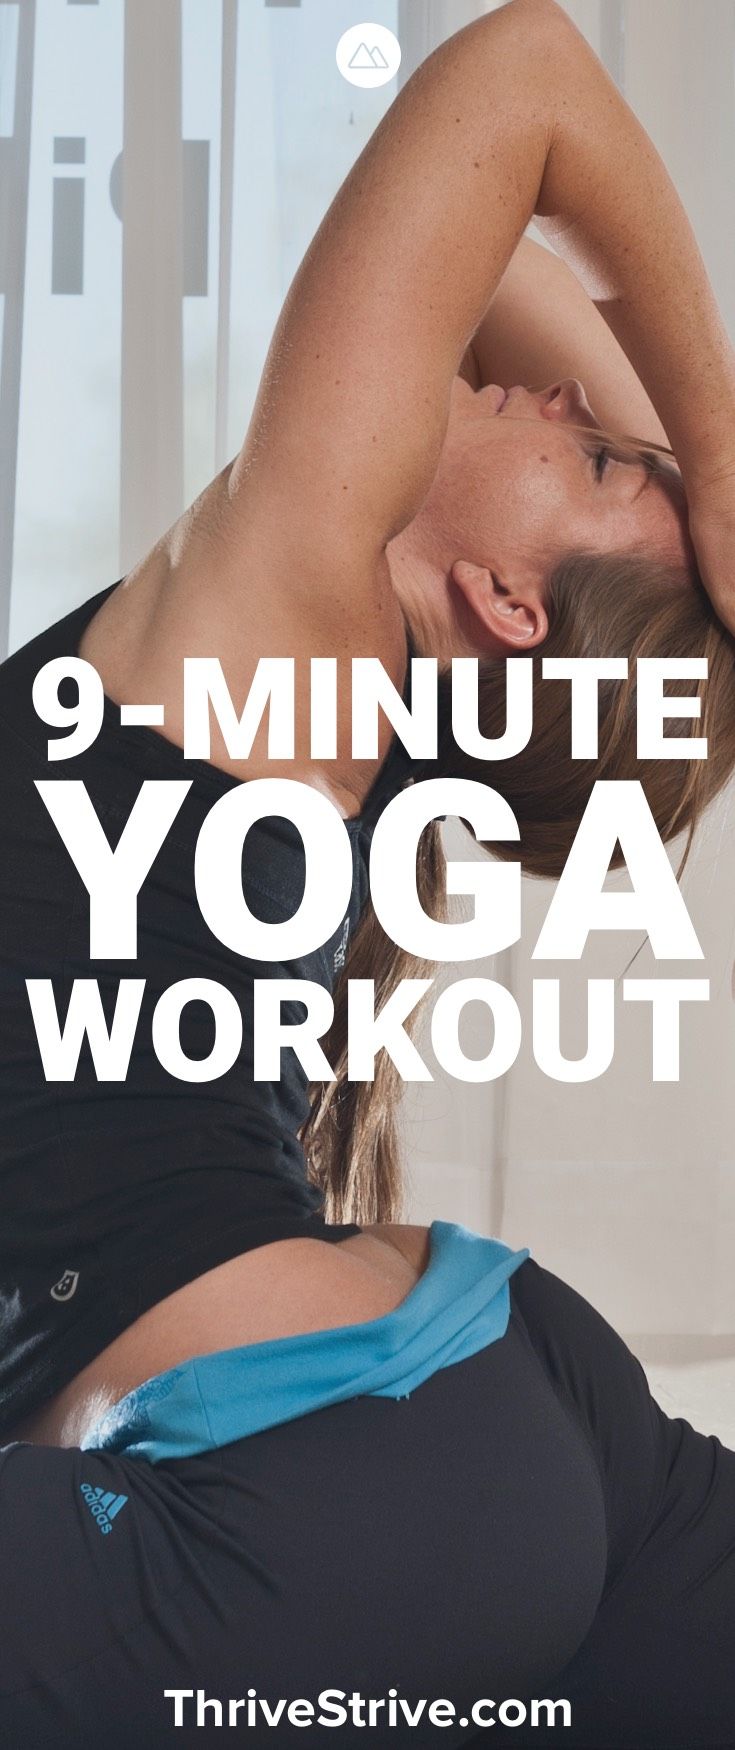 Looking to get toned with yoga and lose weight? This 9 minute yoga strengthening...